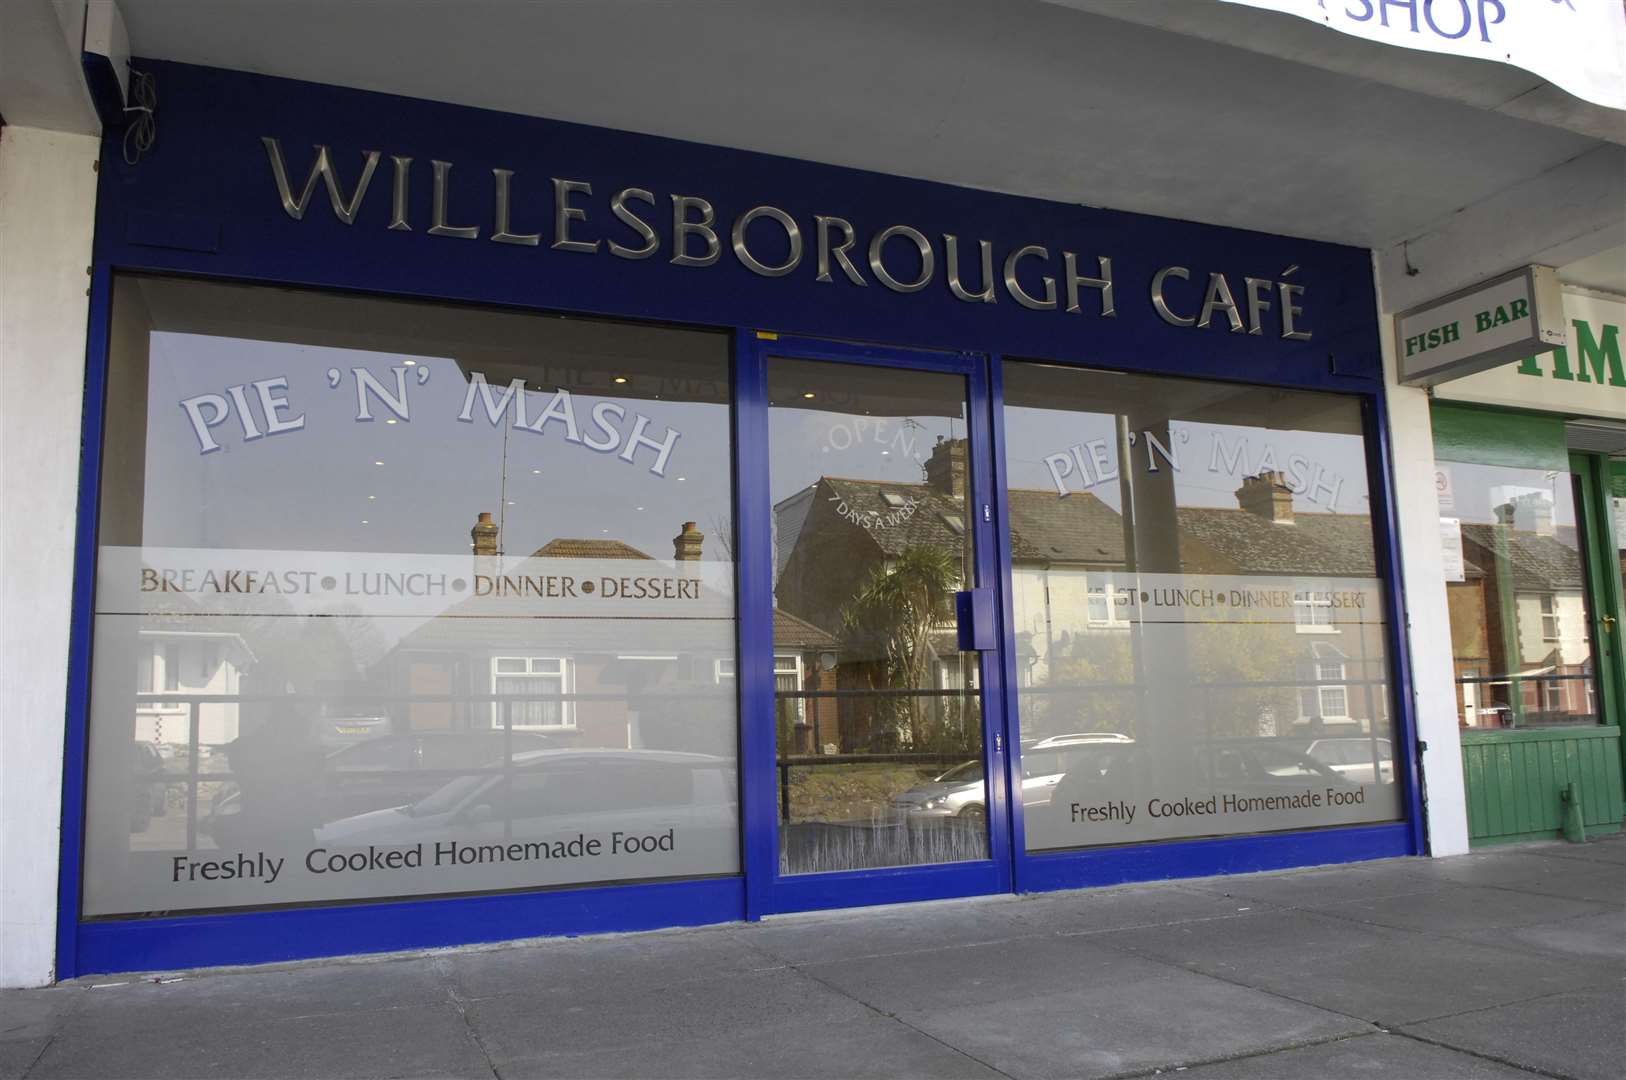 Willesborough Cafe & Pie 'n' Mash Shop was also voted a good place to get a fry-up. Picture: Gary Browne